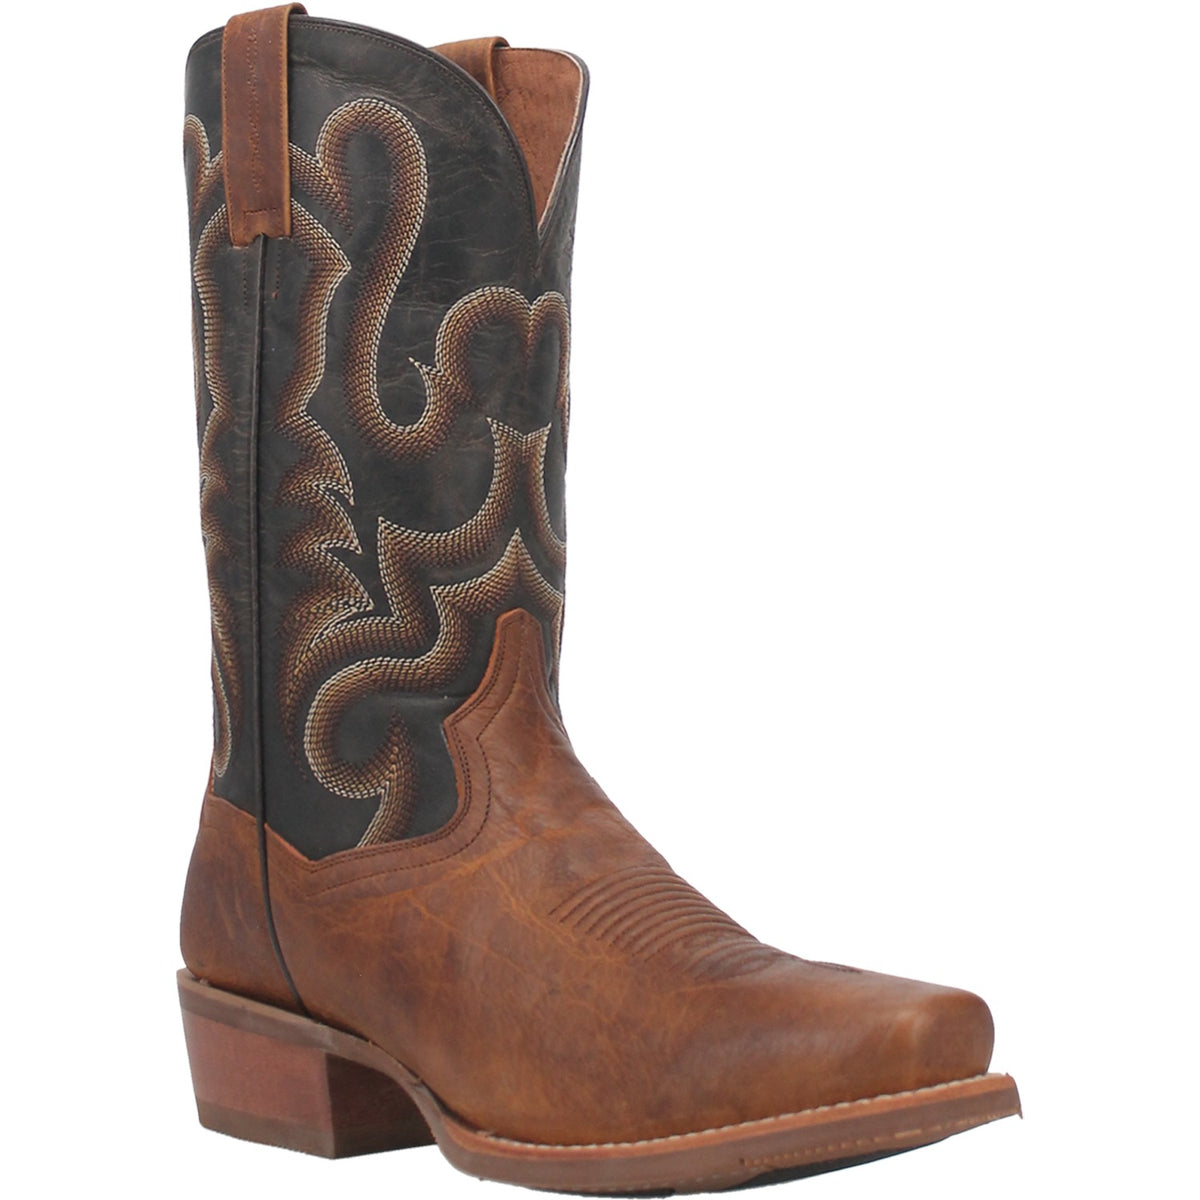 RICHLAND BISON LEATHER BOOT Cover